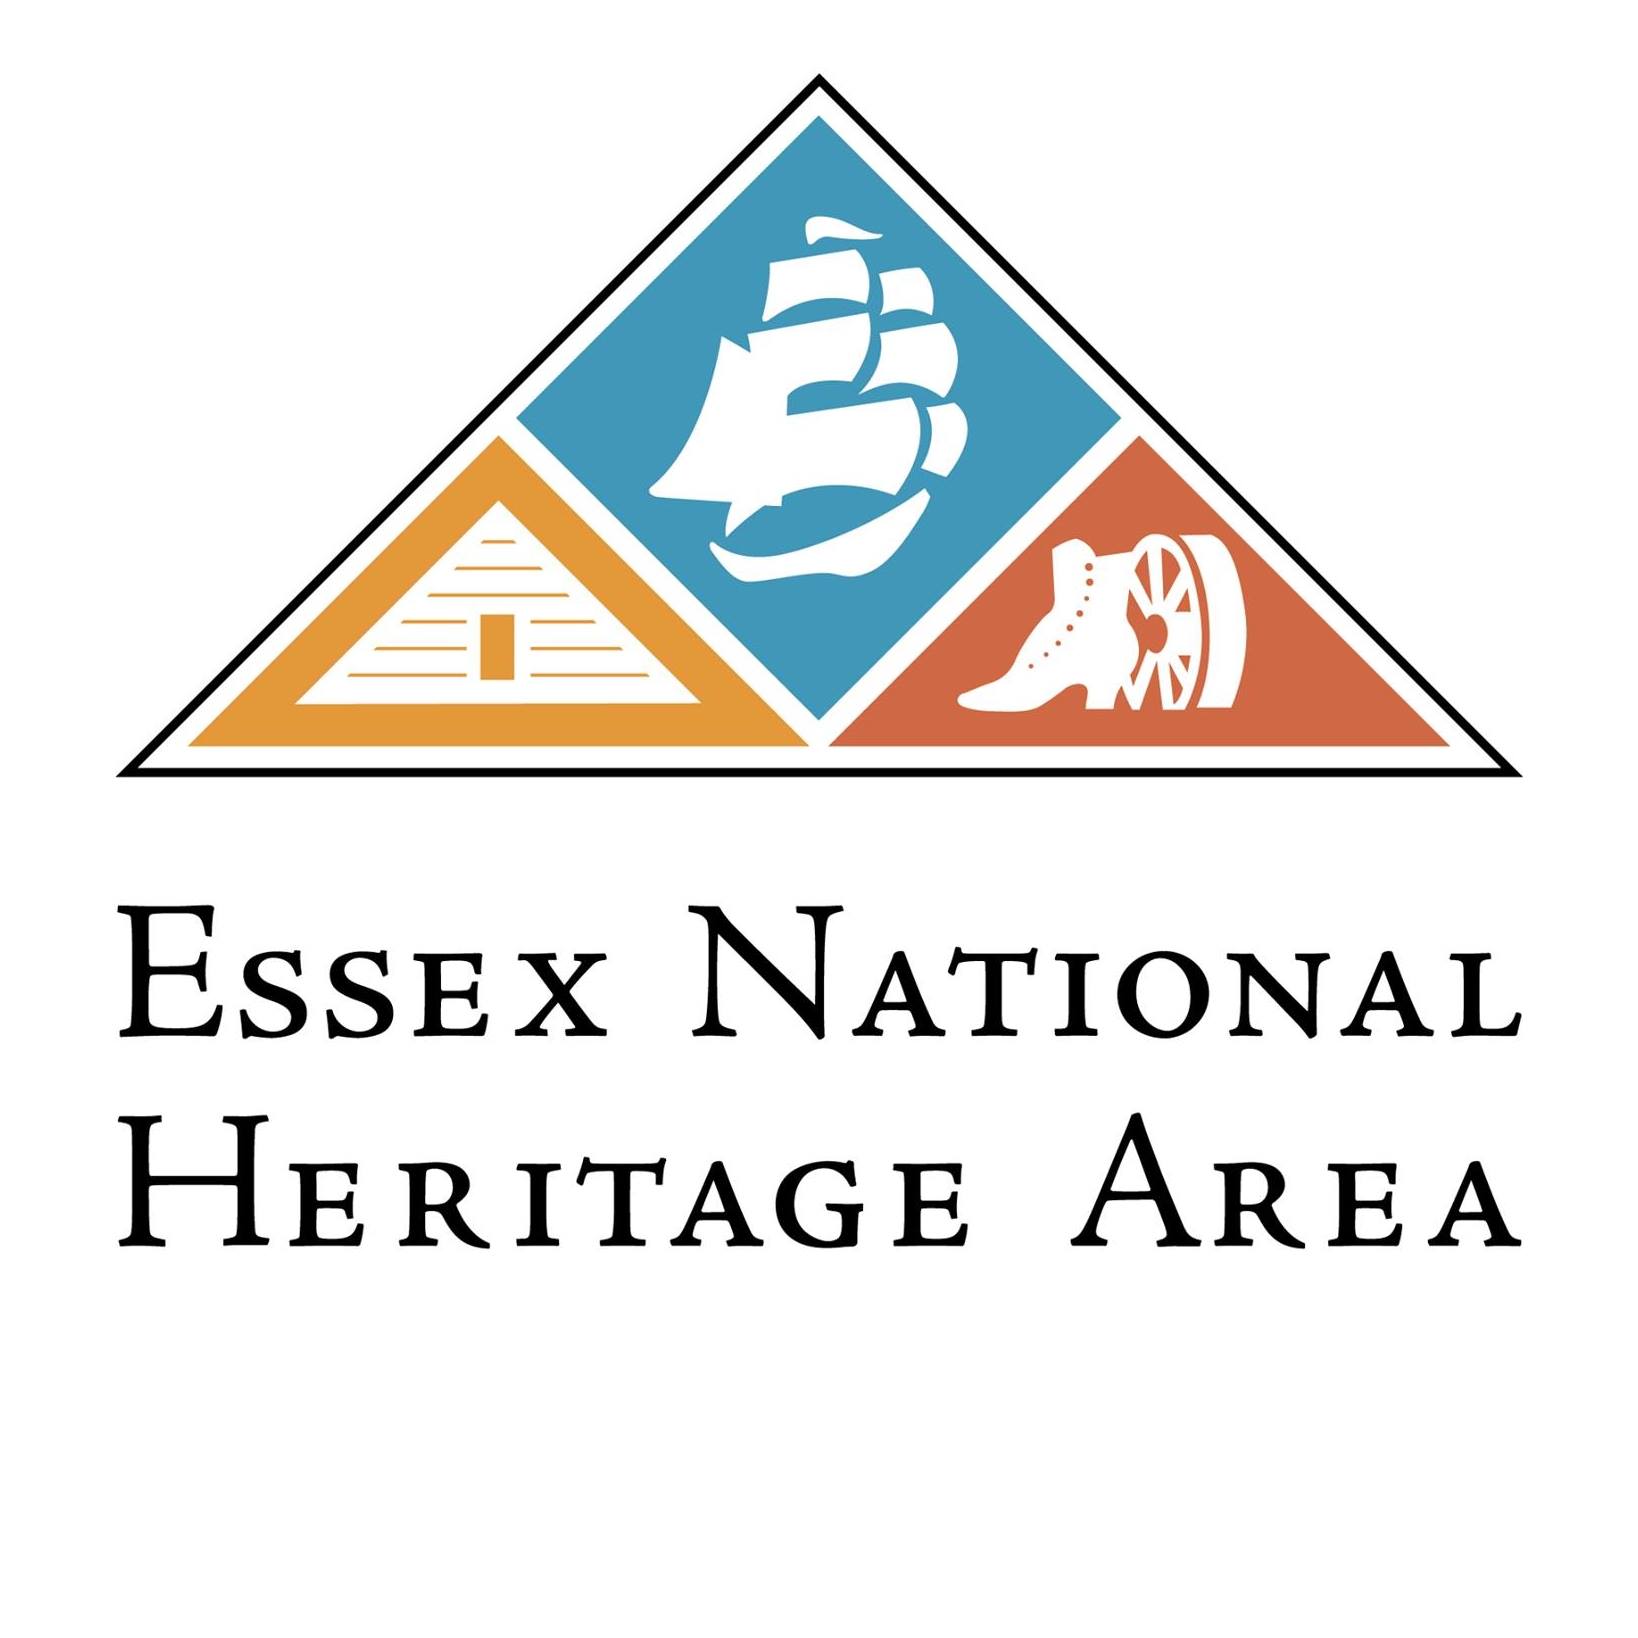 the essex national heritage area logo.